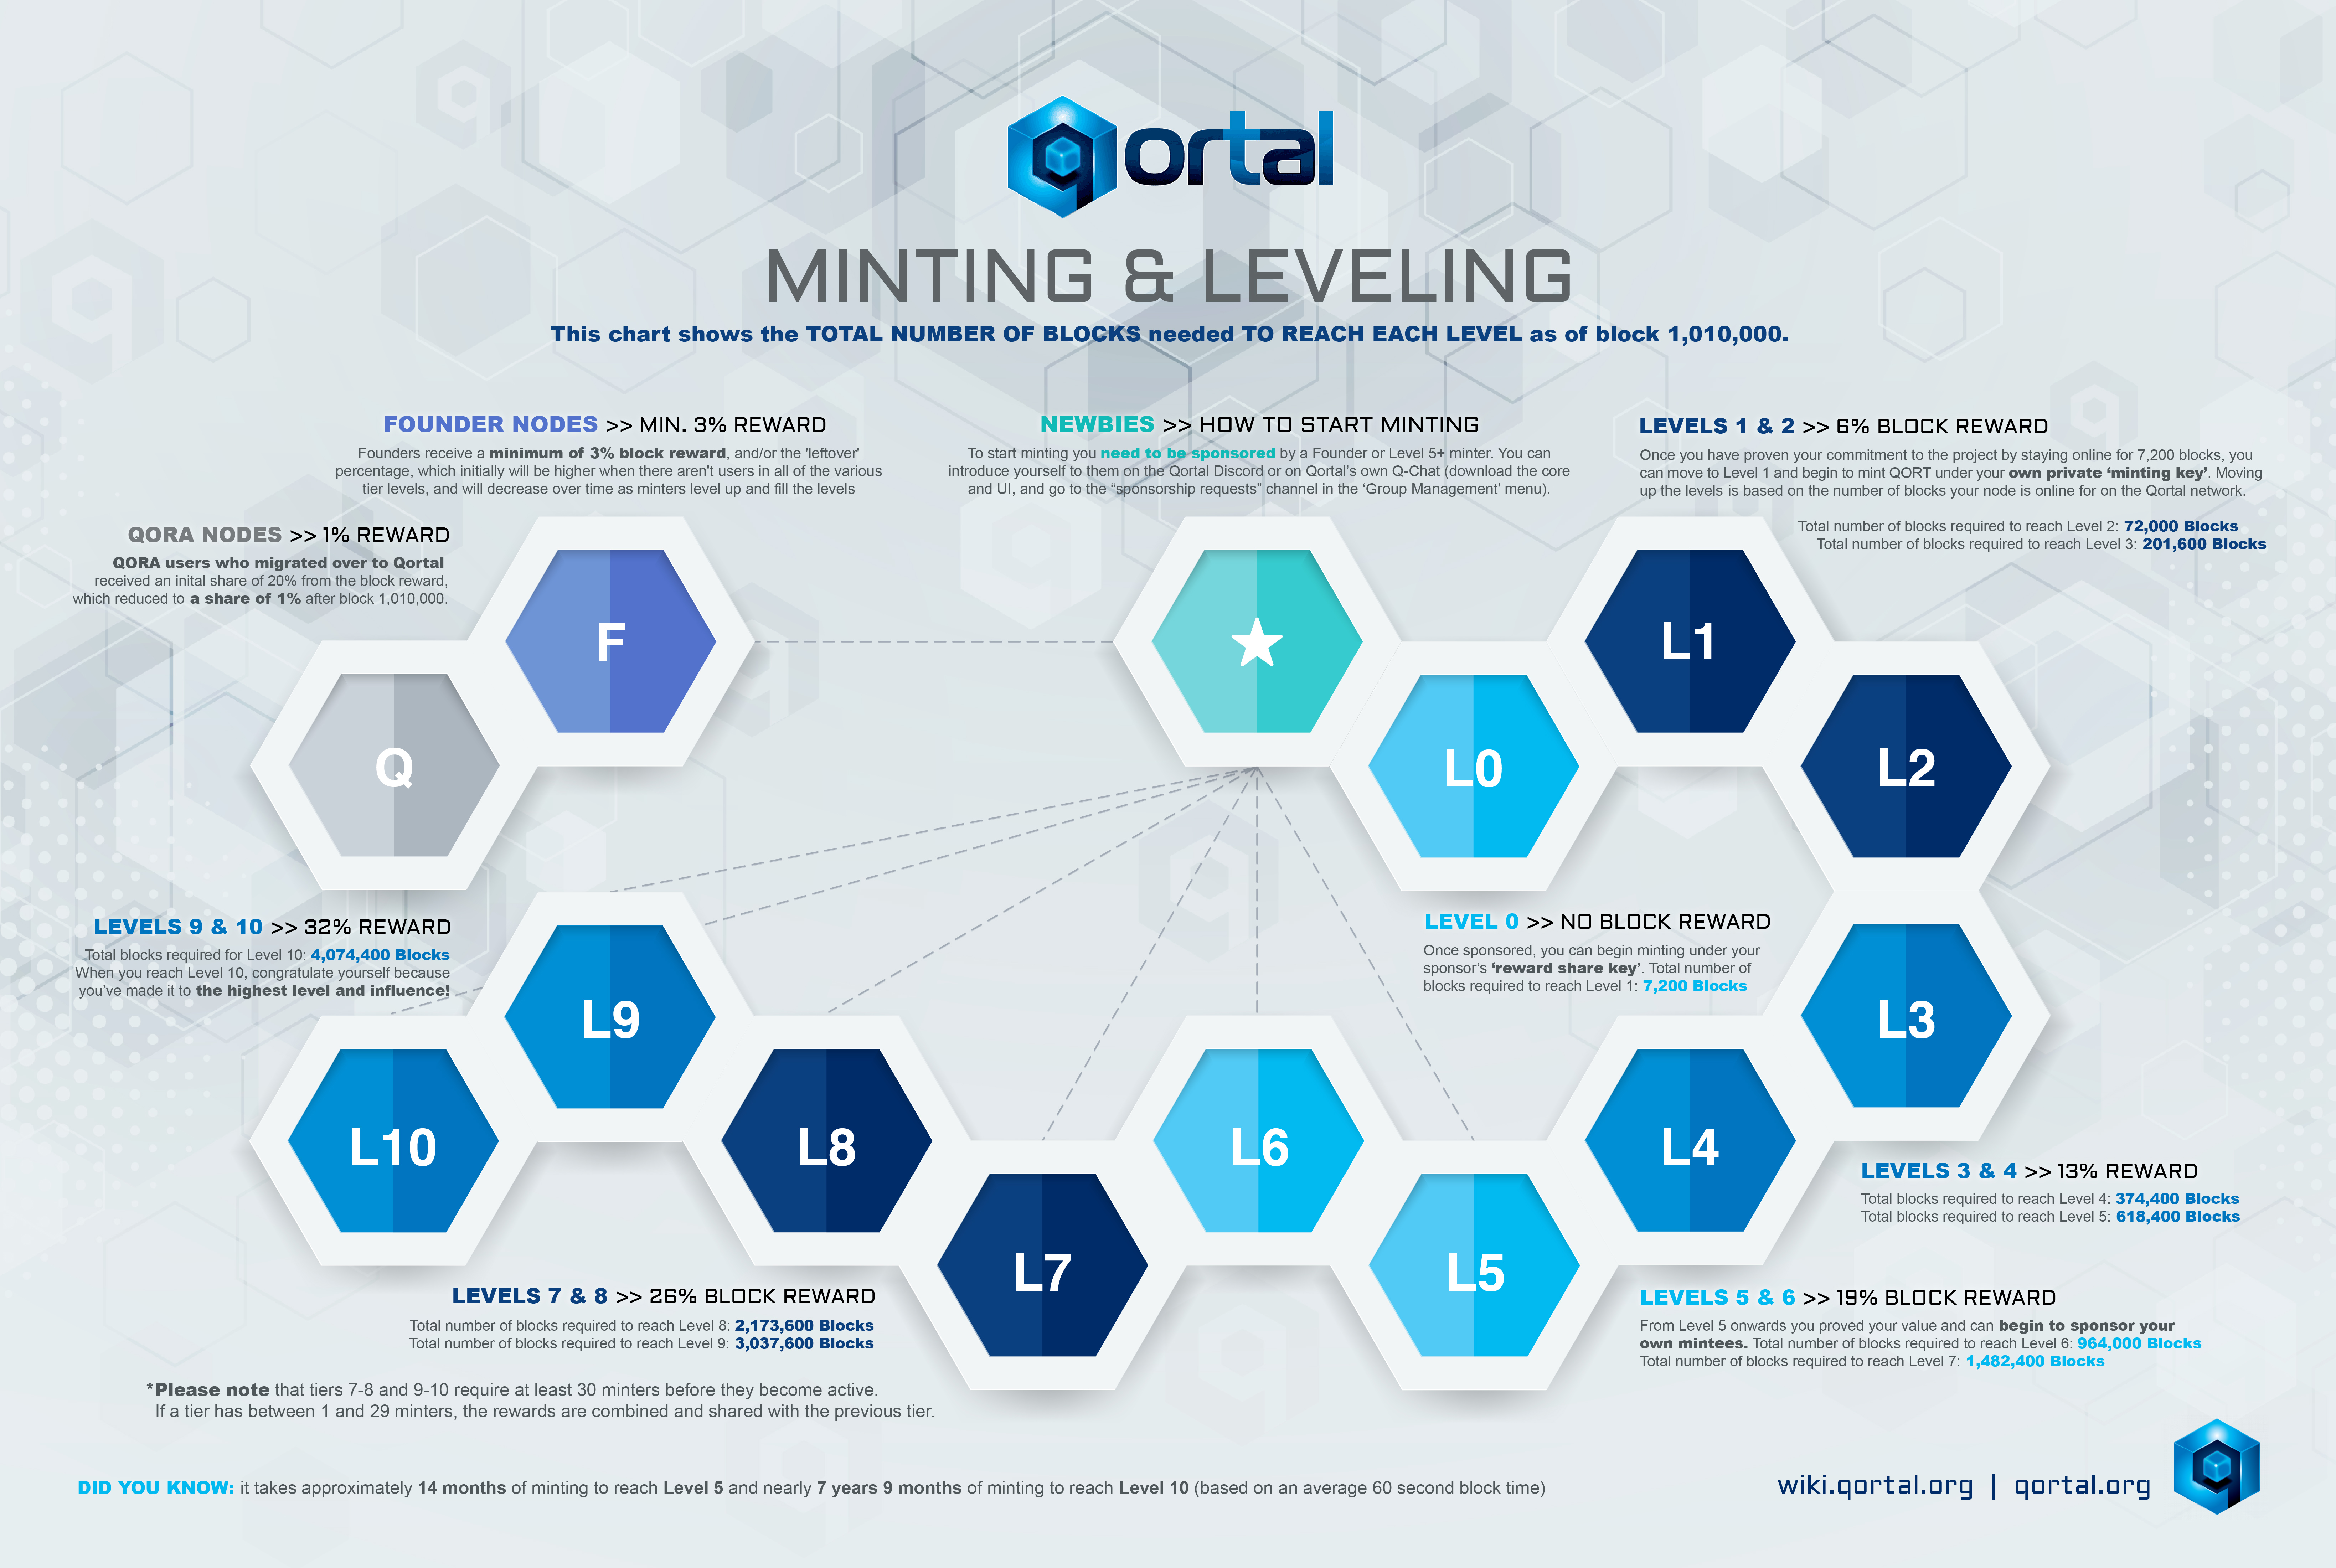 qortal_minting_and_leveling_2023.1678560314.jpg